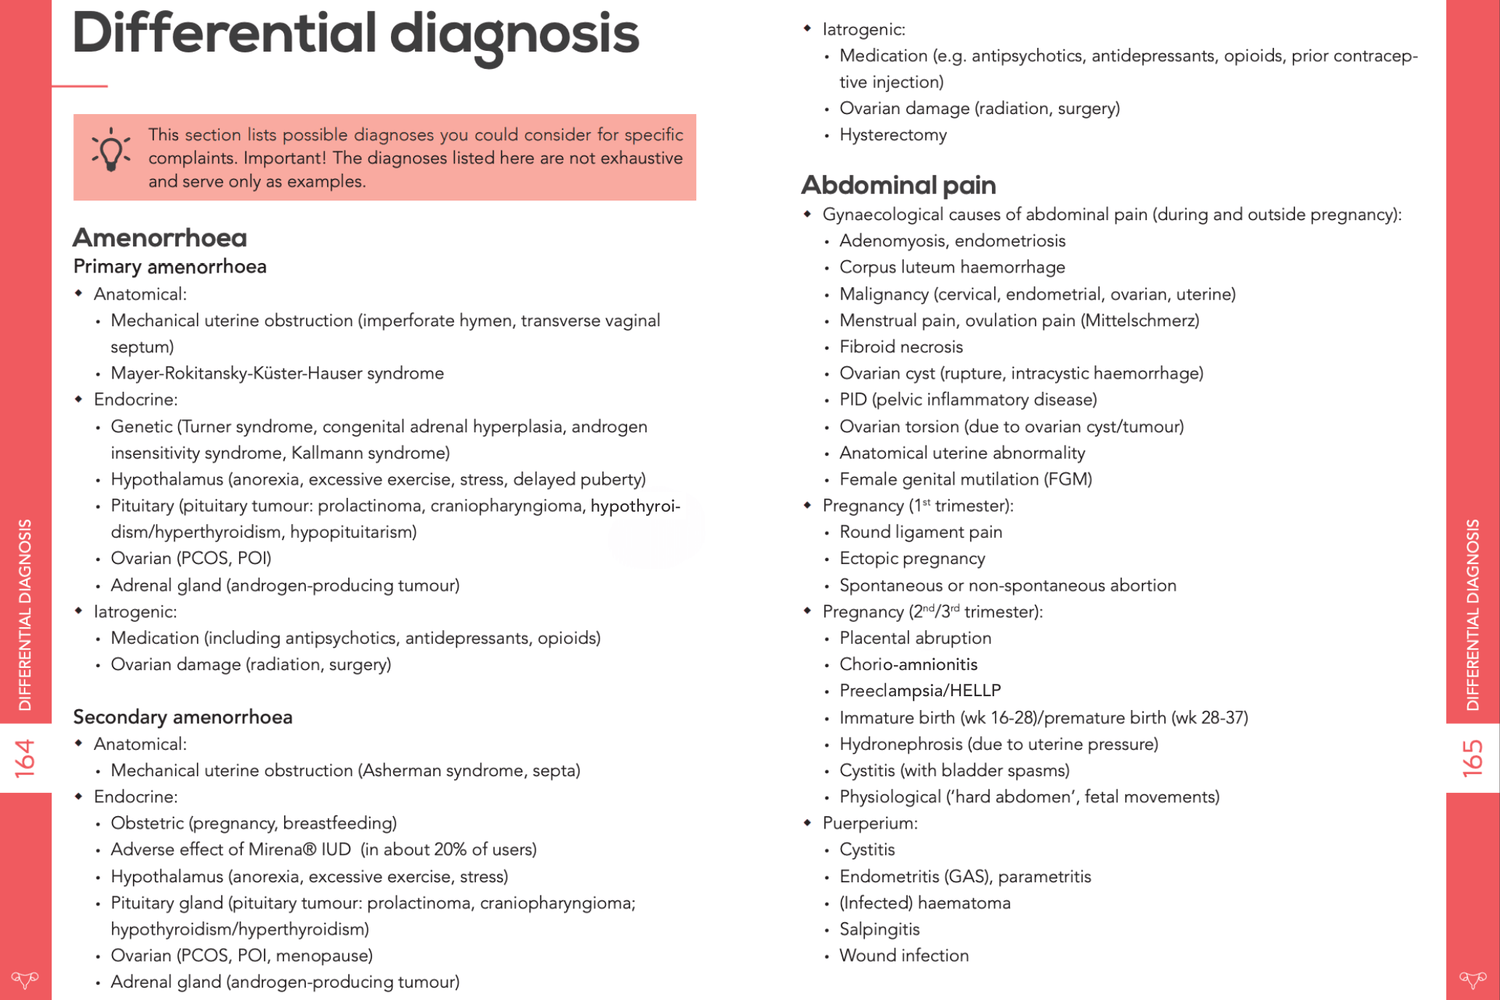 Differential diagnosis Amenorrhoea and Abdominal pain